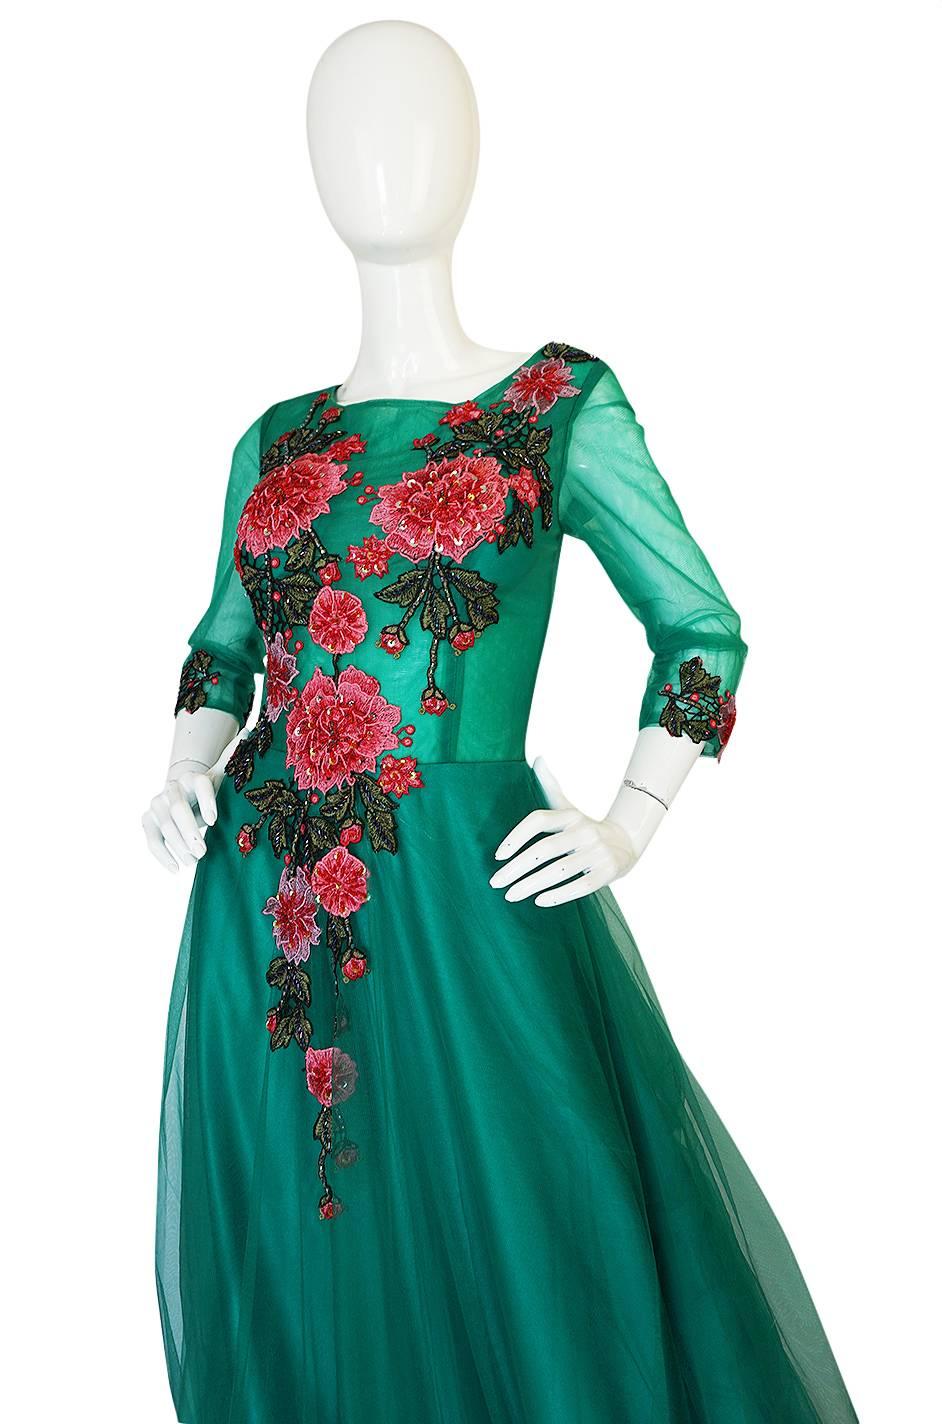 Vintage Trained Emerald Green Lace Tulle Gown w Floral Applique 2